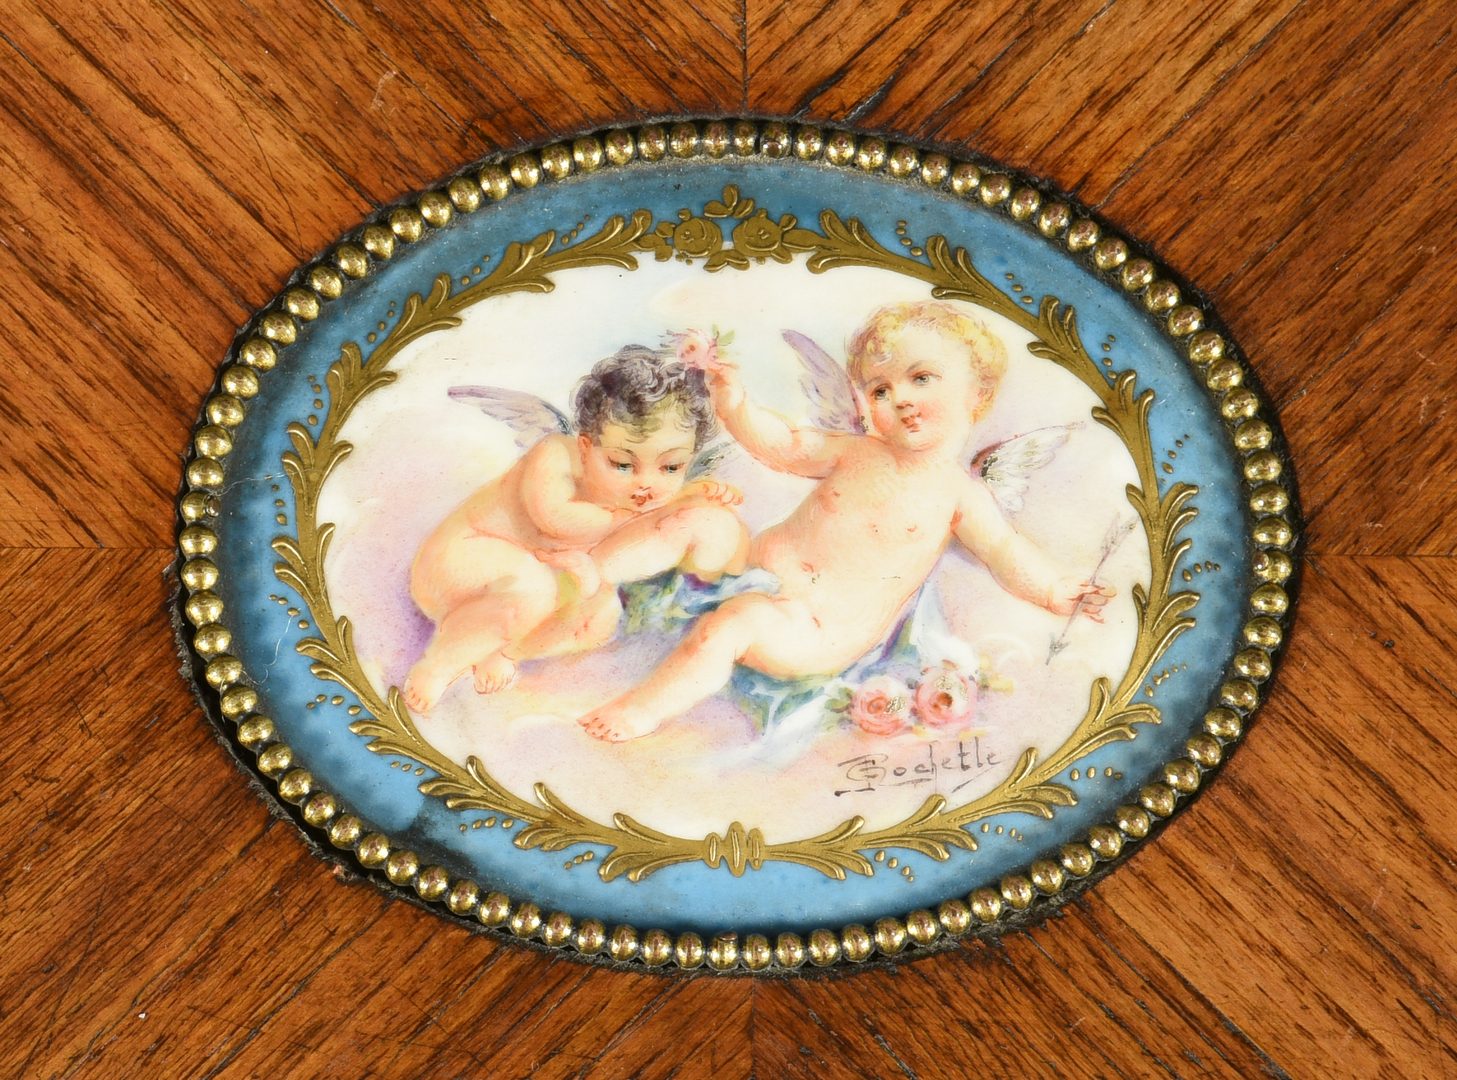 Lot 107: French Table with Porcelain Plaques